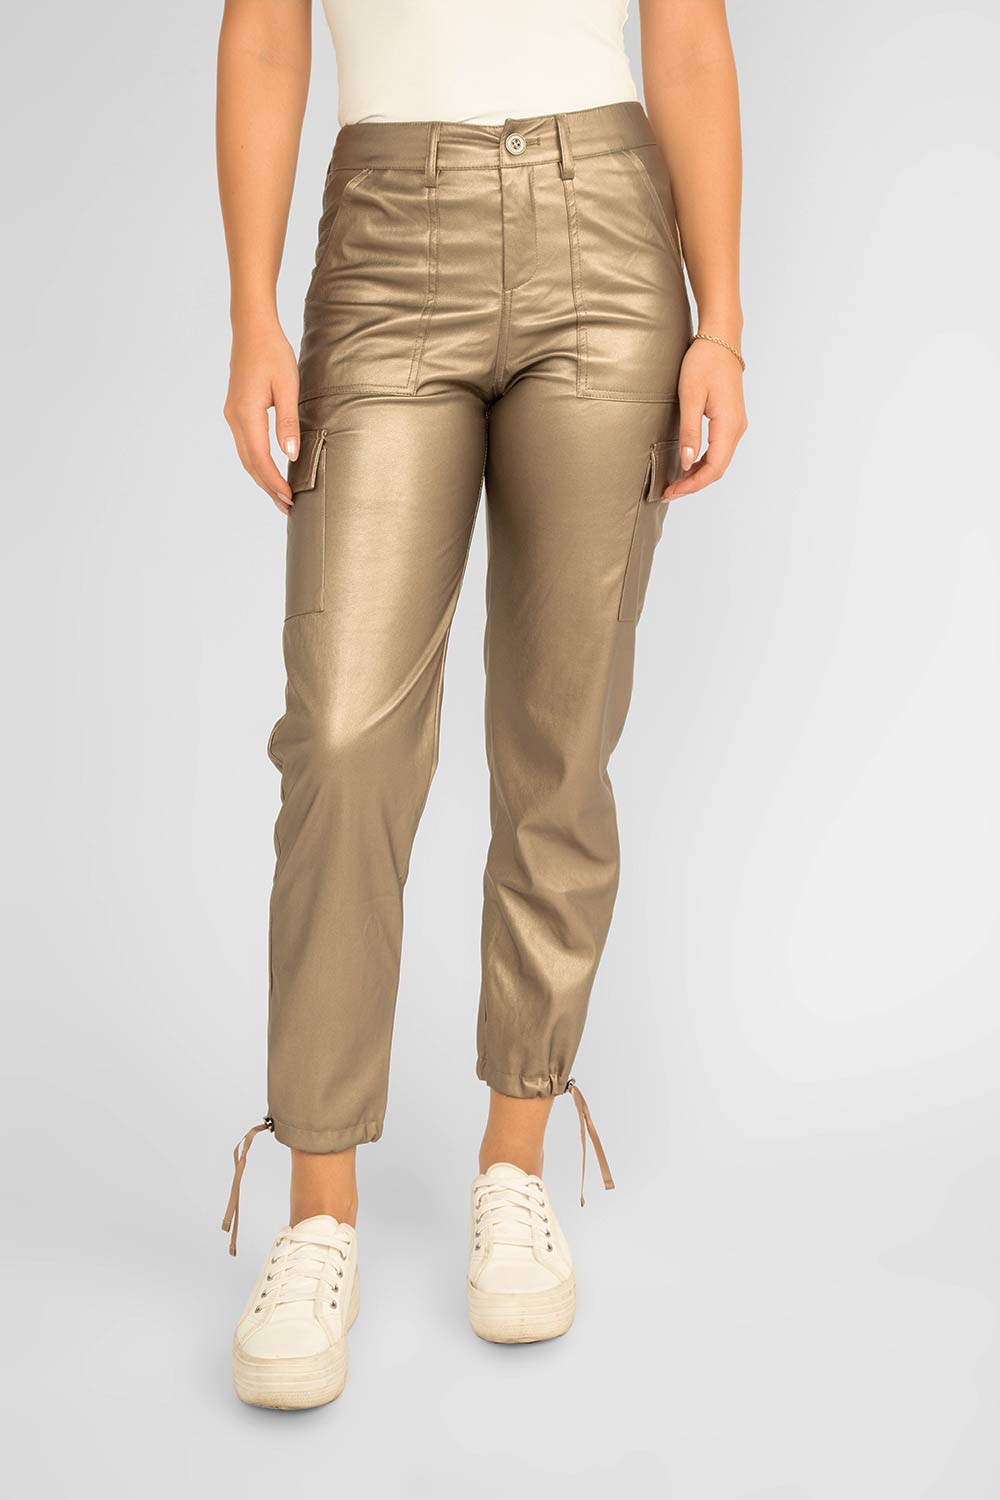 Women's Clothing ESQUALO (F2311503) Metallic Cargo Pants in SOFTGOLD